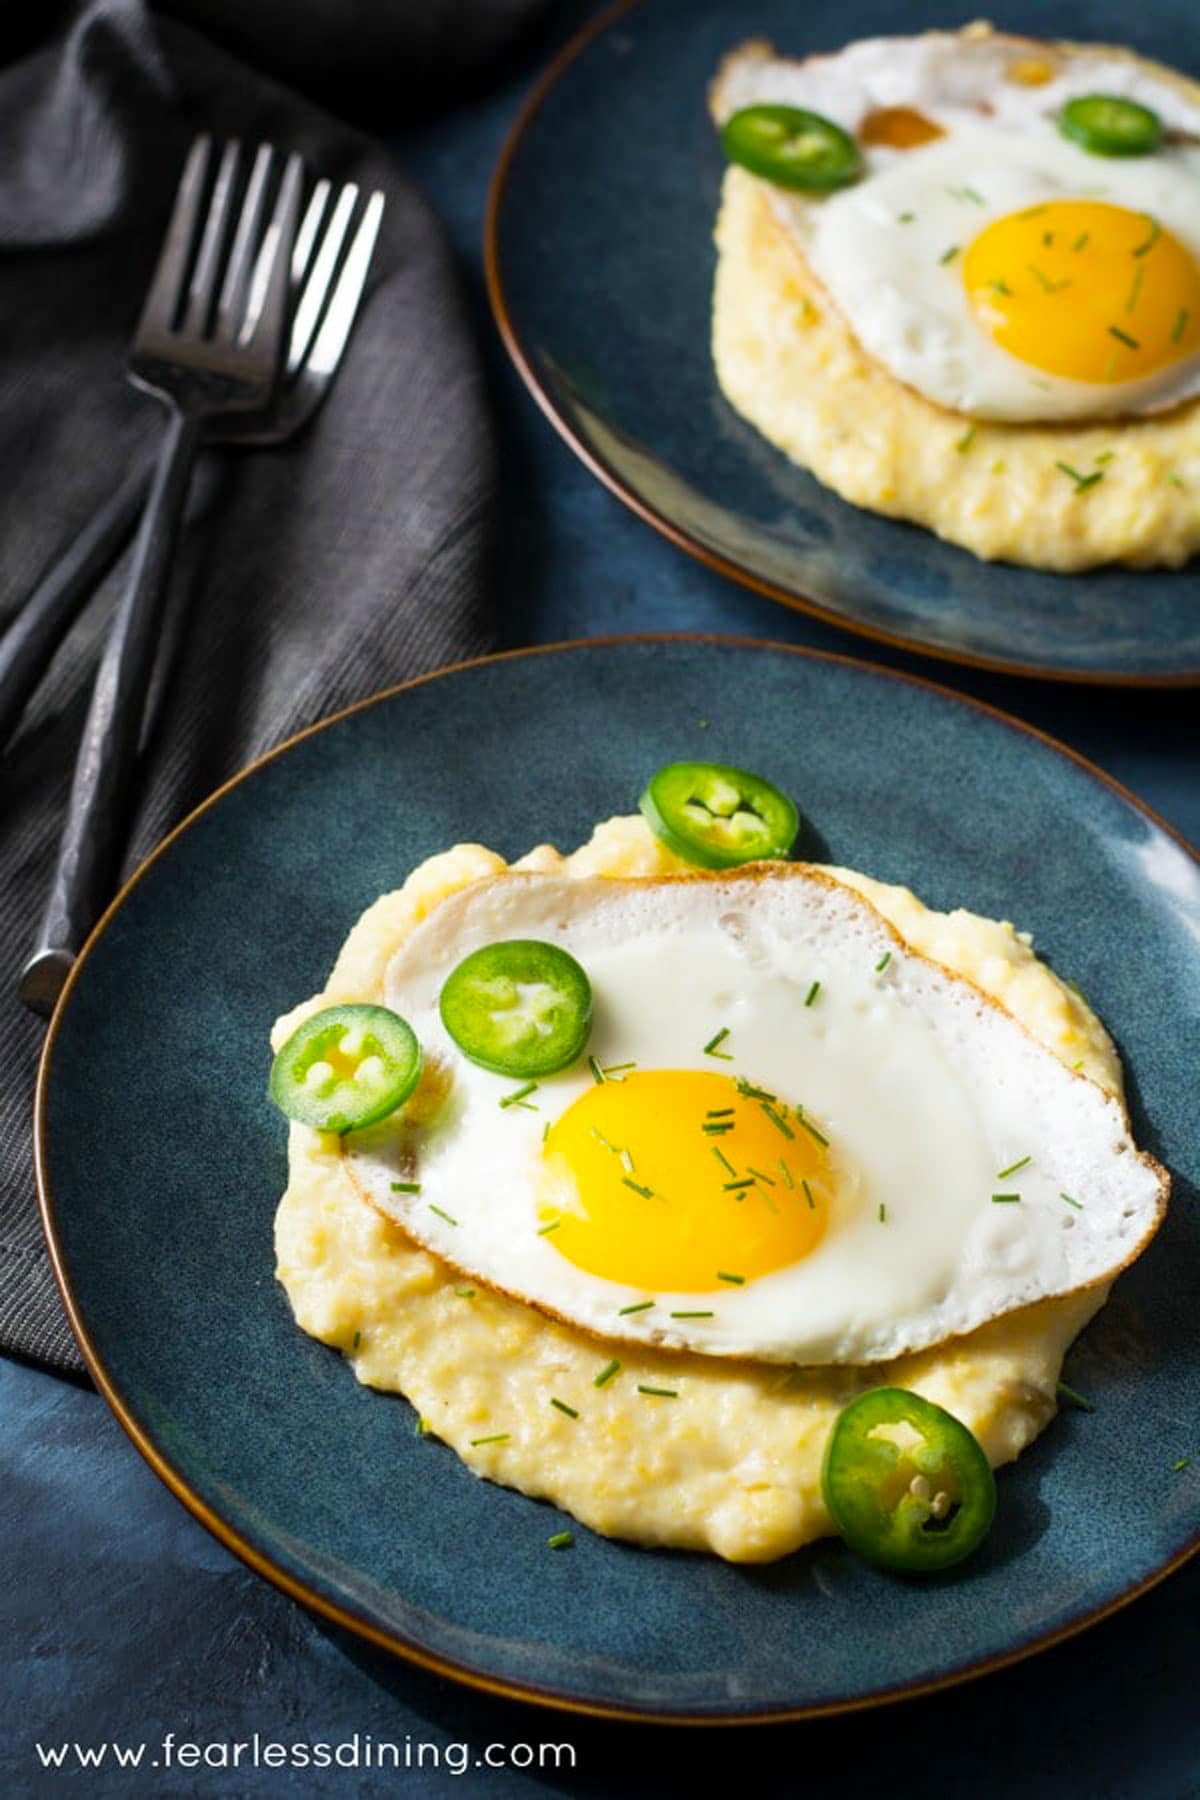 Cheese grits with a sunny side up fried egg on top.